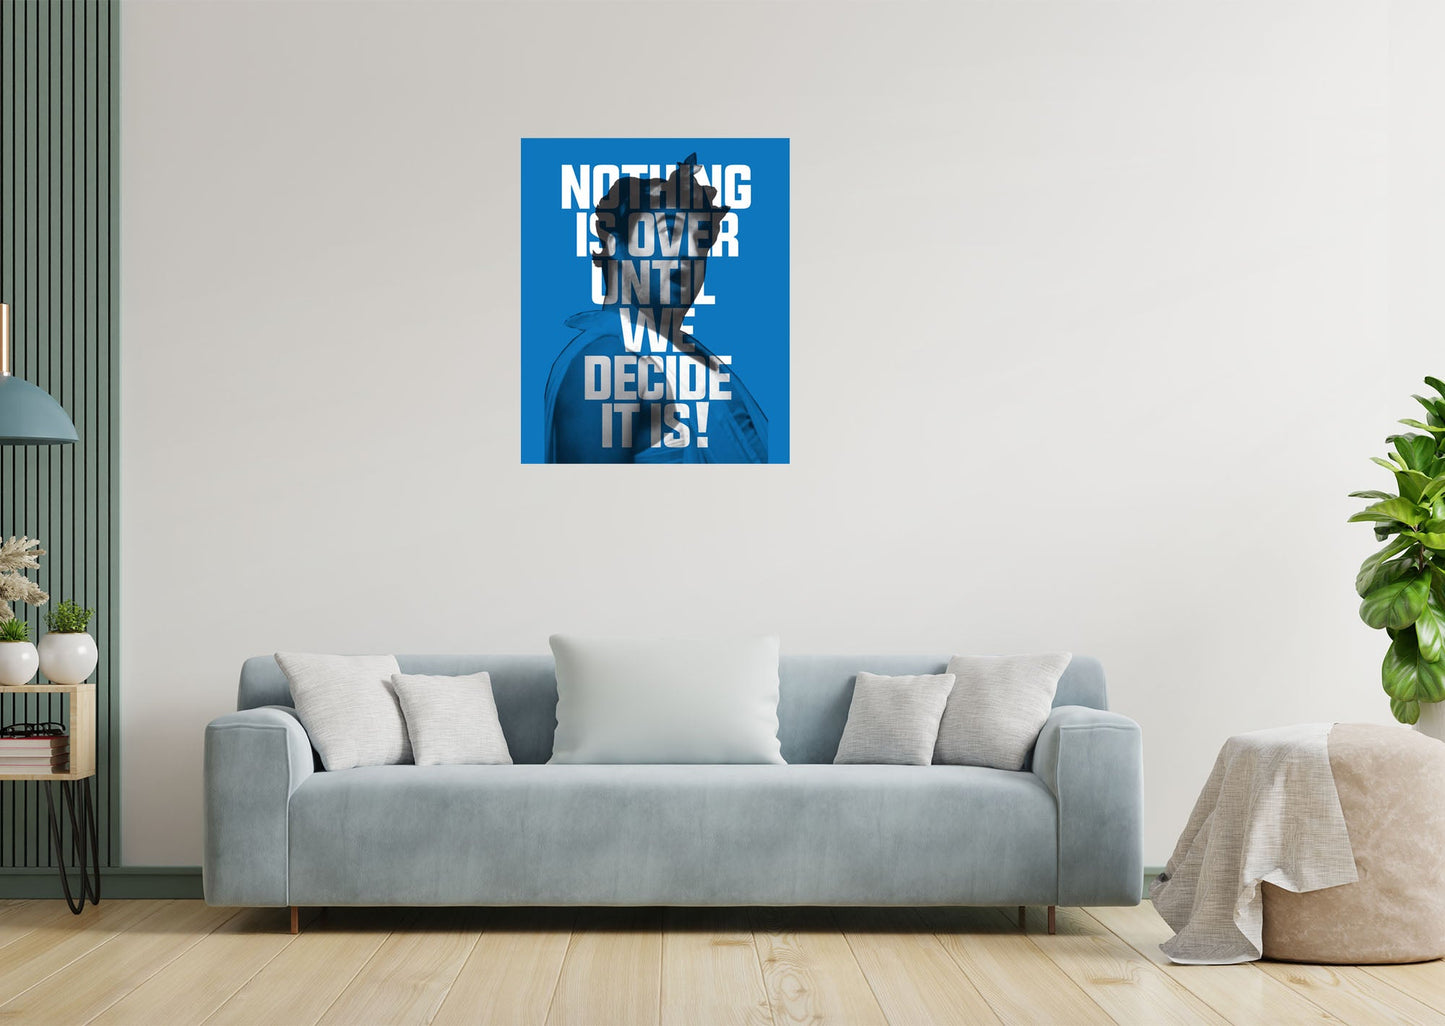 Animal House:  Nothing is Over Mural        - Officially Licensed NBC Universal Removable Wall   Adhesive Decal